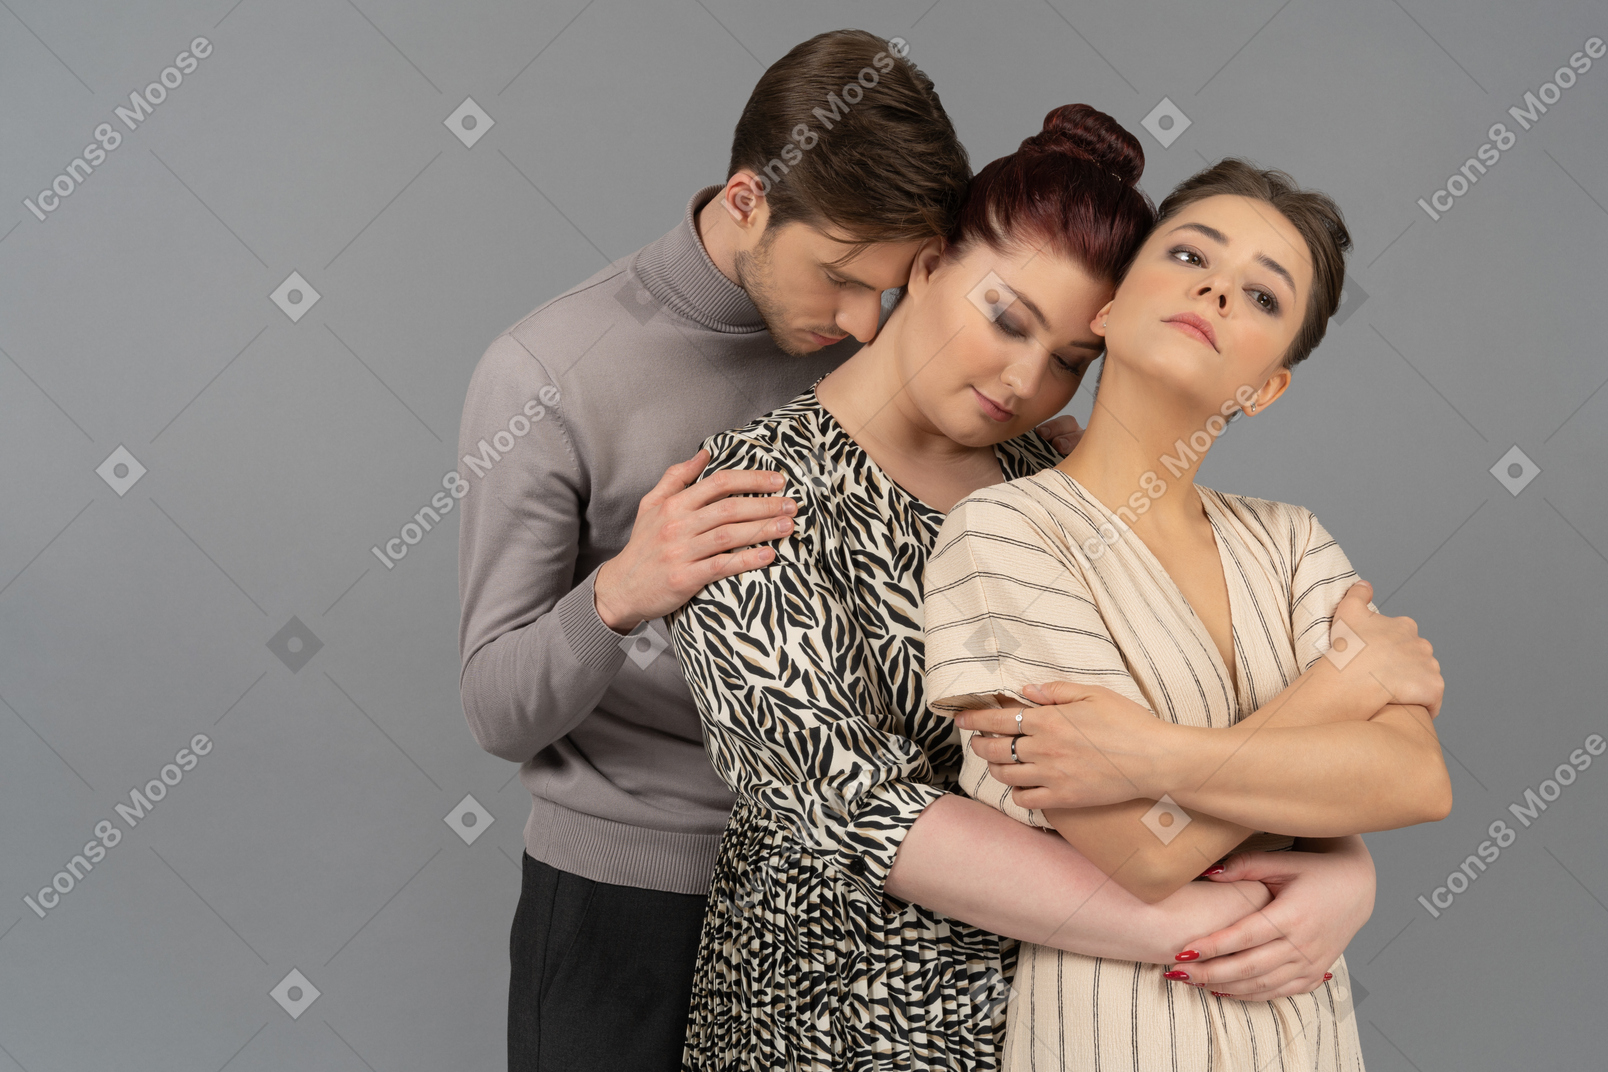 Warm embraces from two young women and one young man